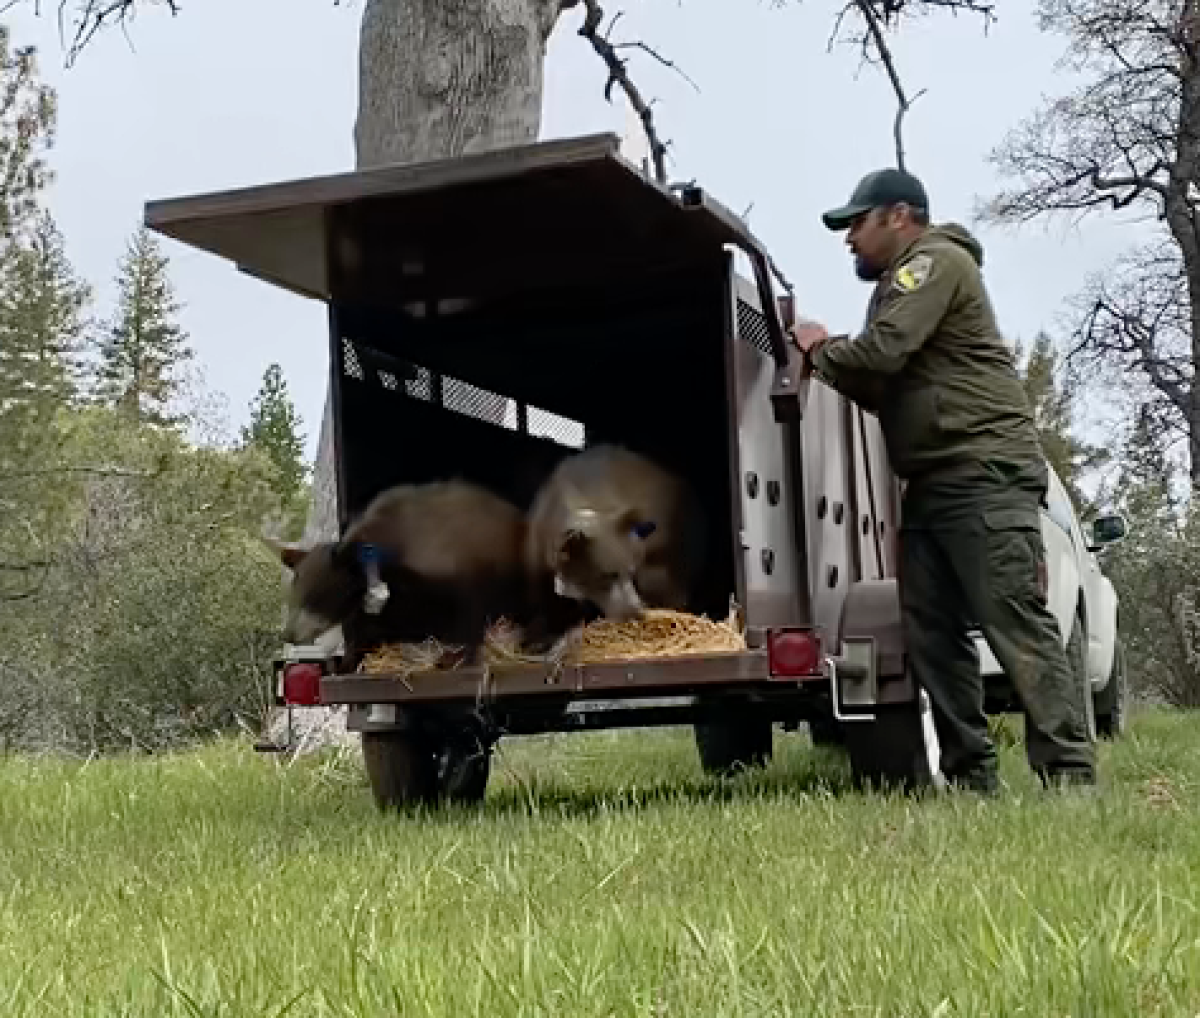 The cubs were fitted with radio collars before release.